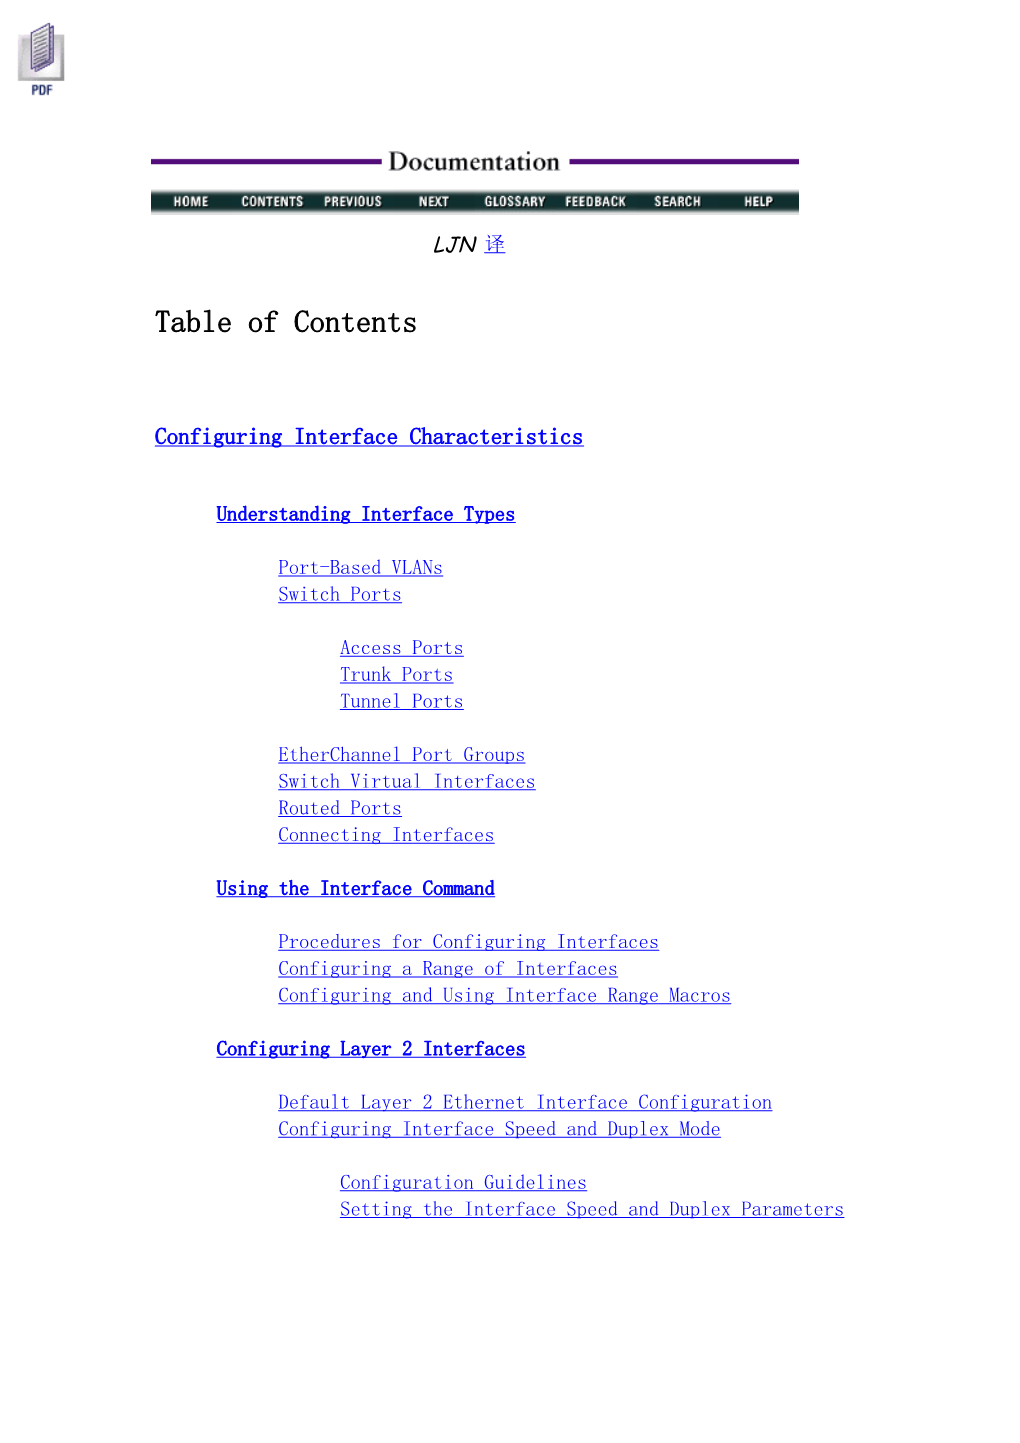 Table of Contents s107